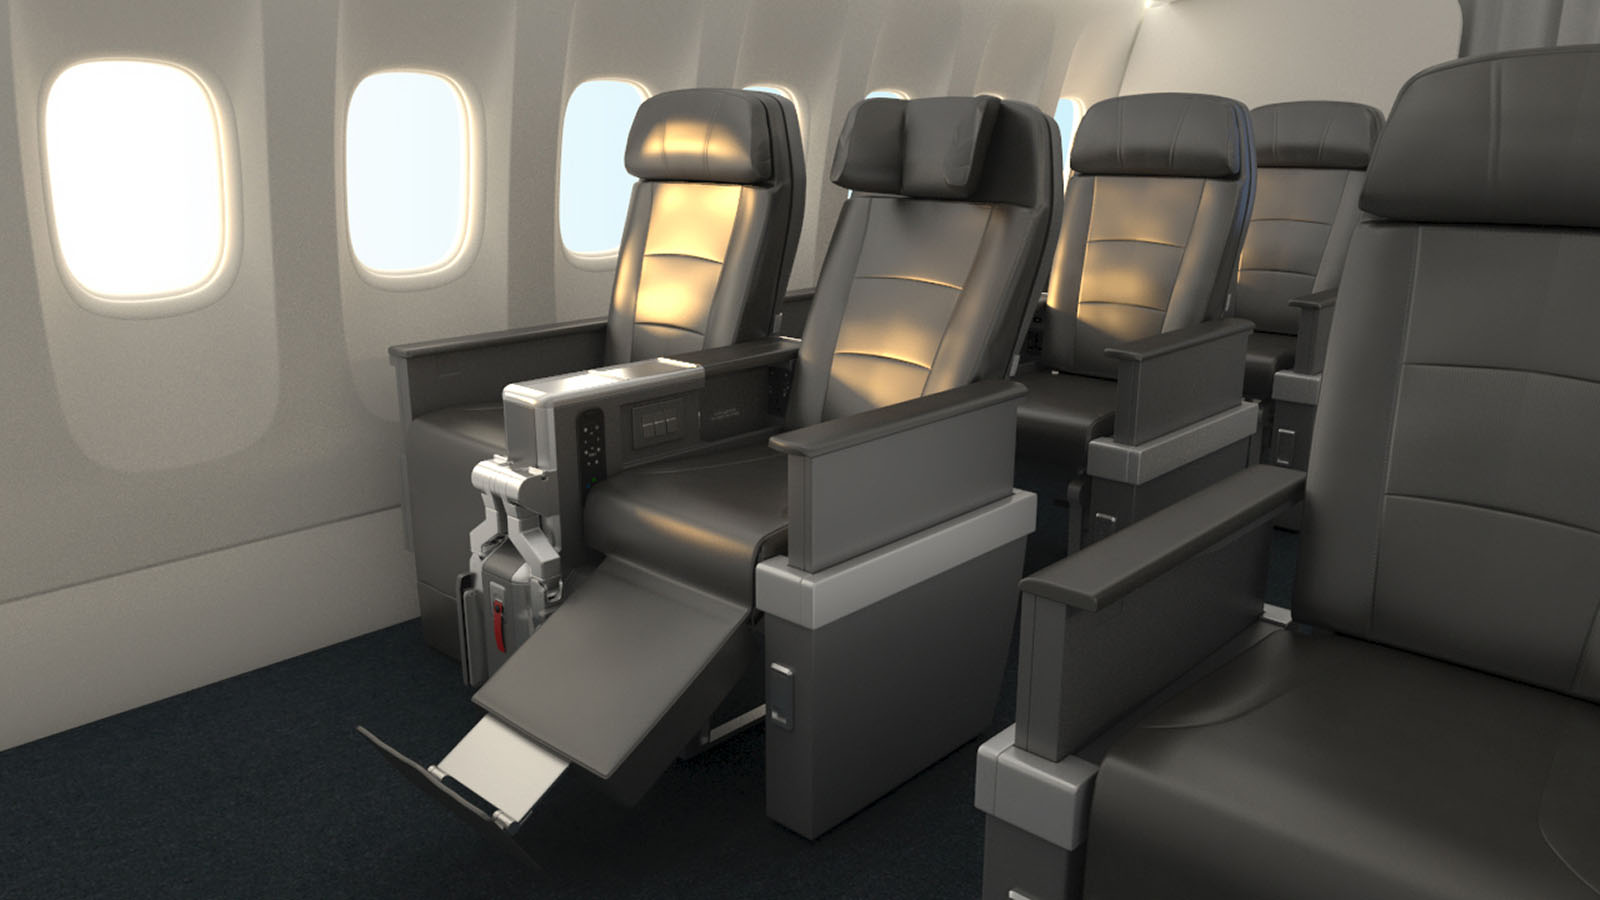 Chair in American Airlines Premium Economy